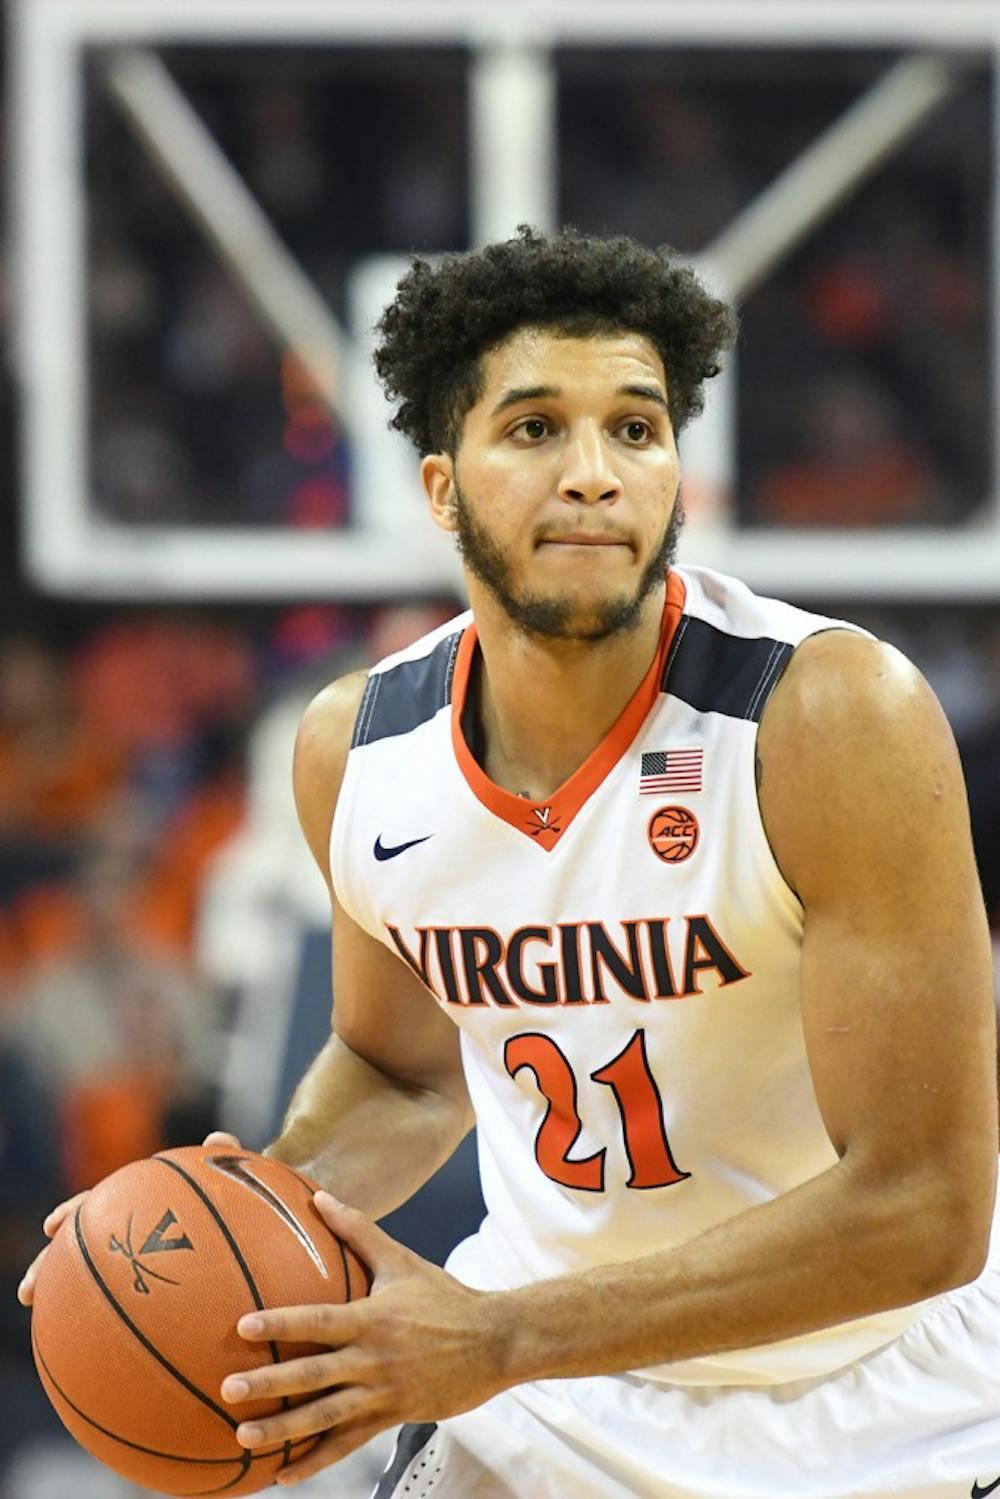 <p>Junior forward Isaiah Wilkins recorded his first collegiate double-double  with 13 points and 11 rebounds against Louisville Monday night.</p>